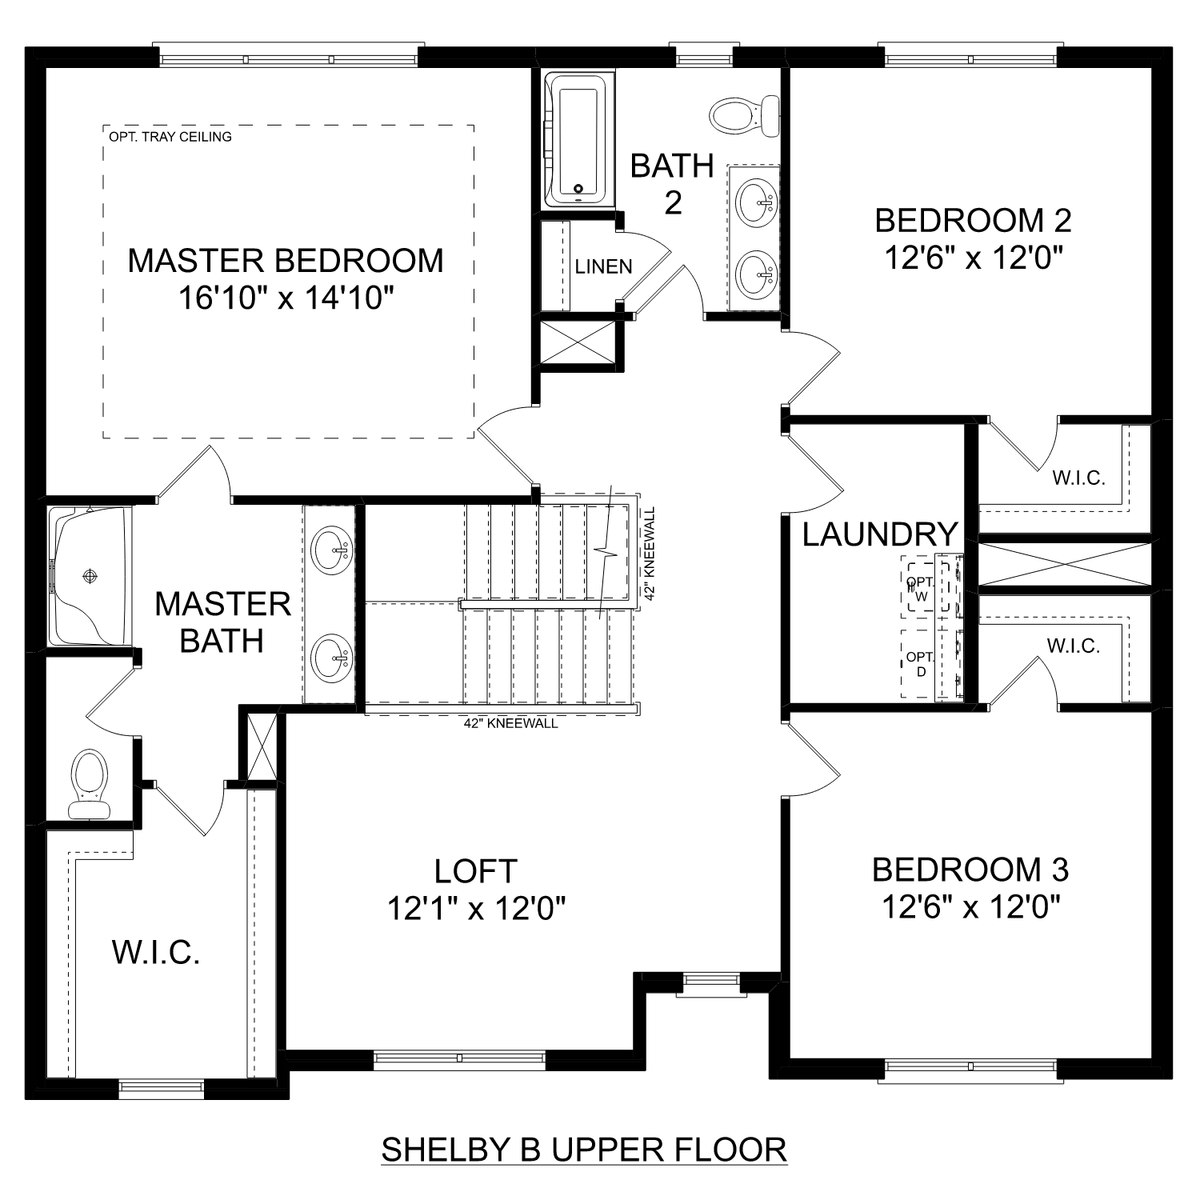 2 - The Shelby B - Side Entry floor plan layout for 124 Ivy Vine Drive in Davidson Homes' Ivy Hills community.